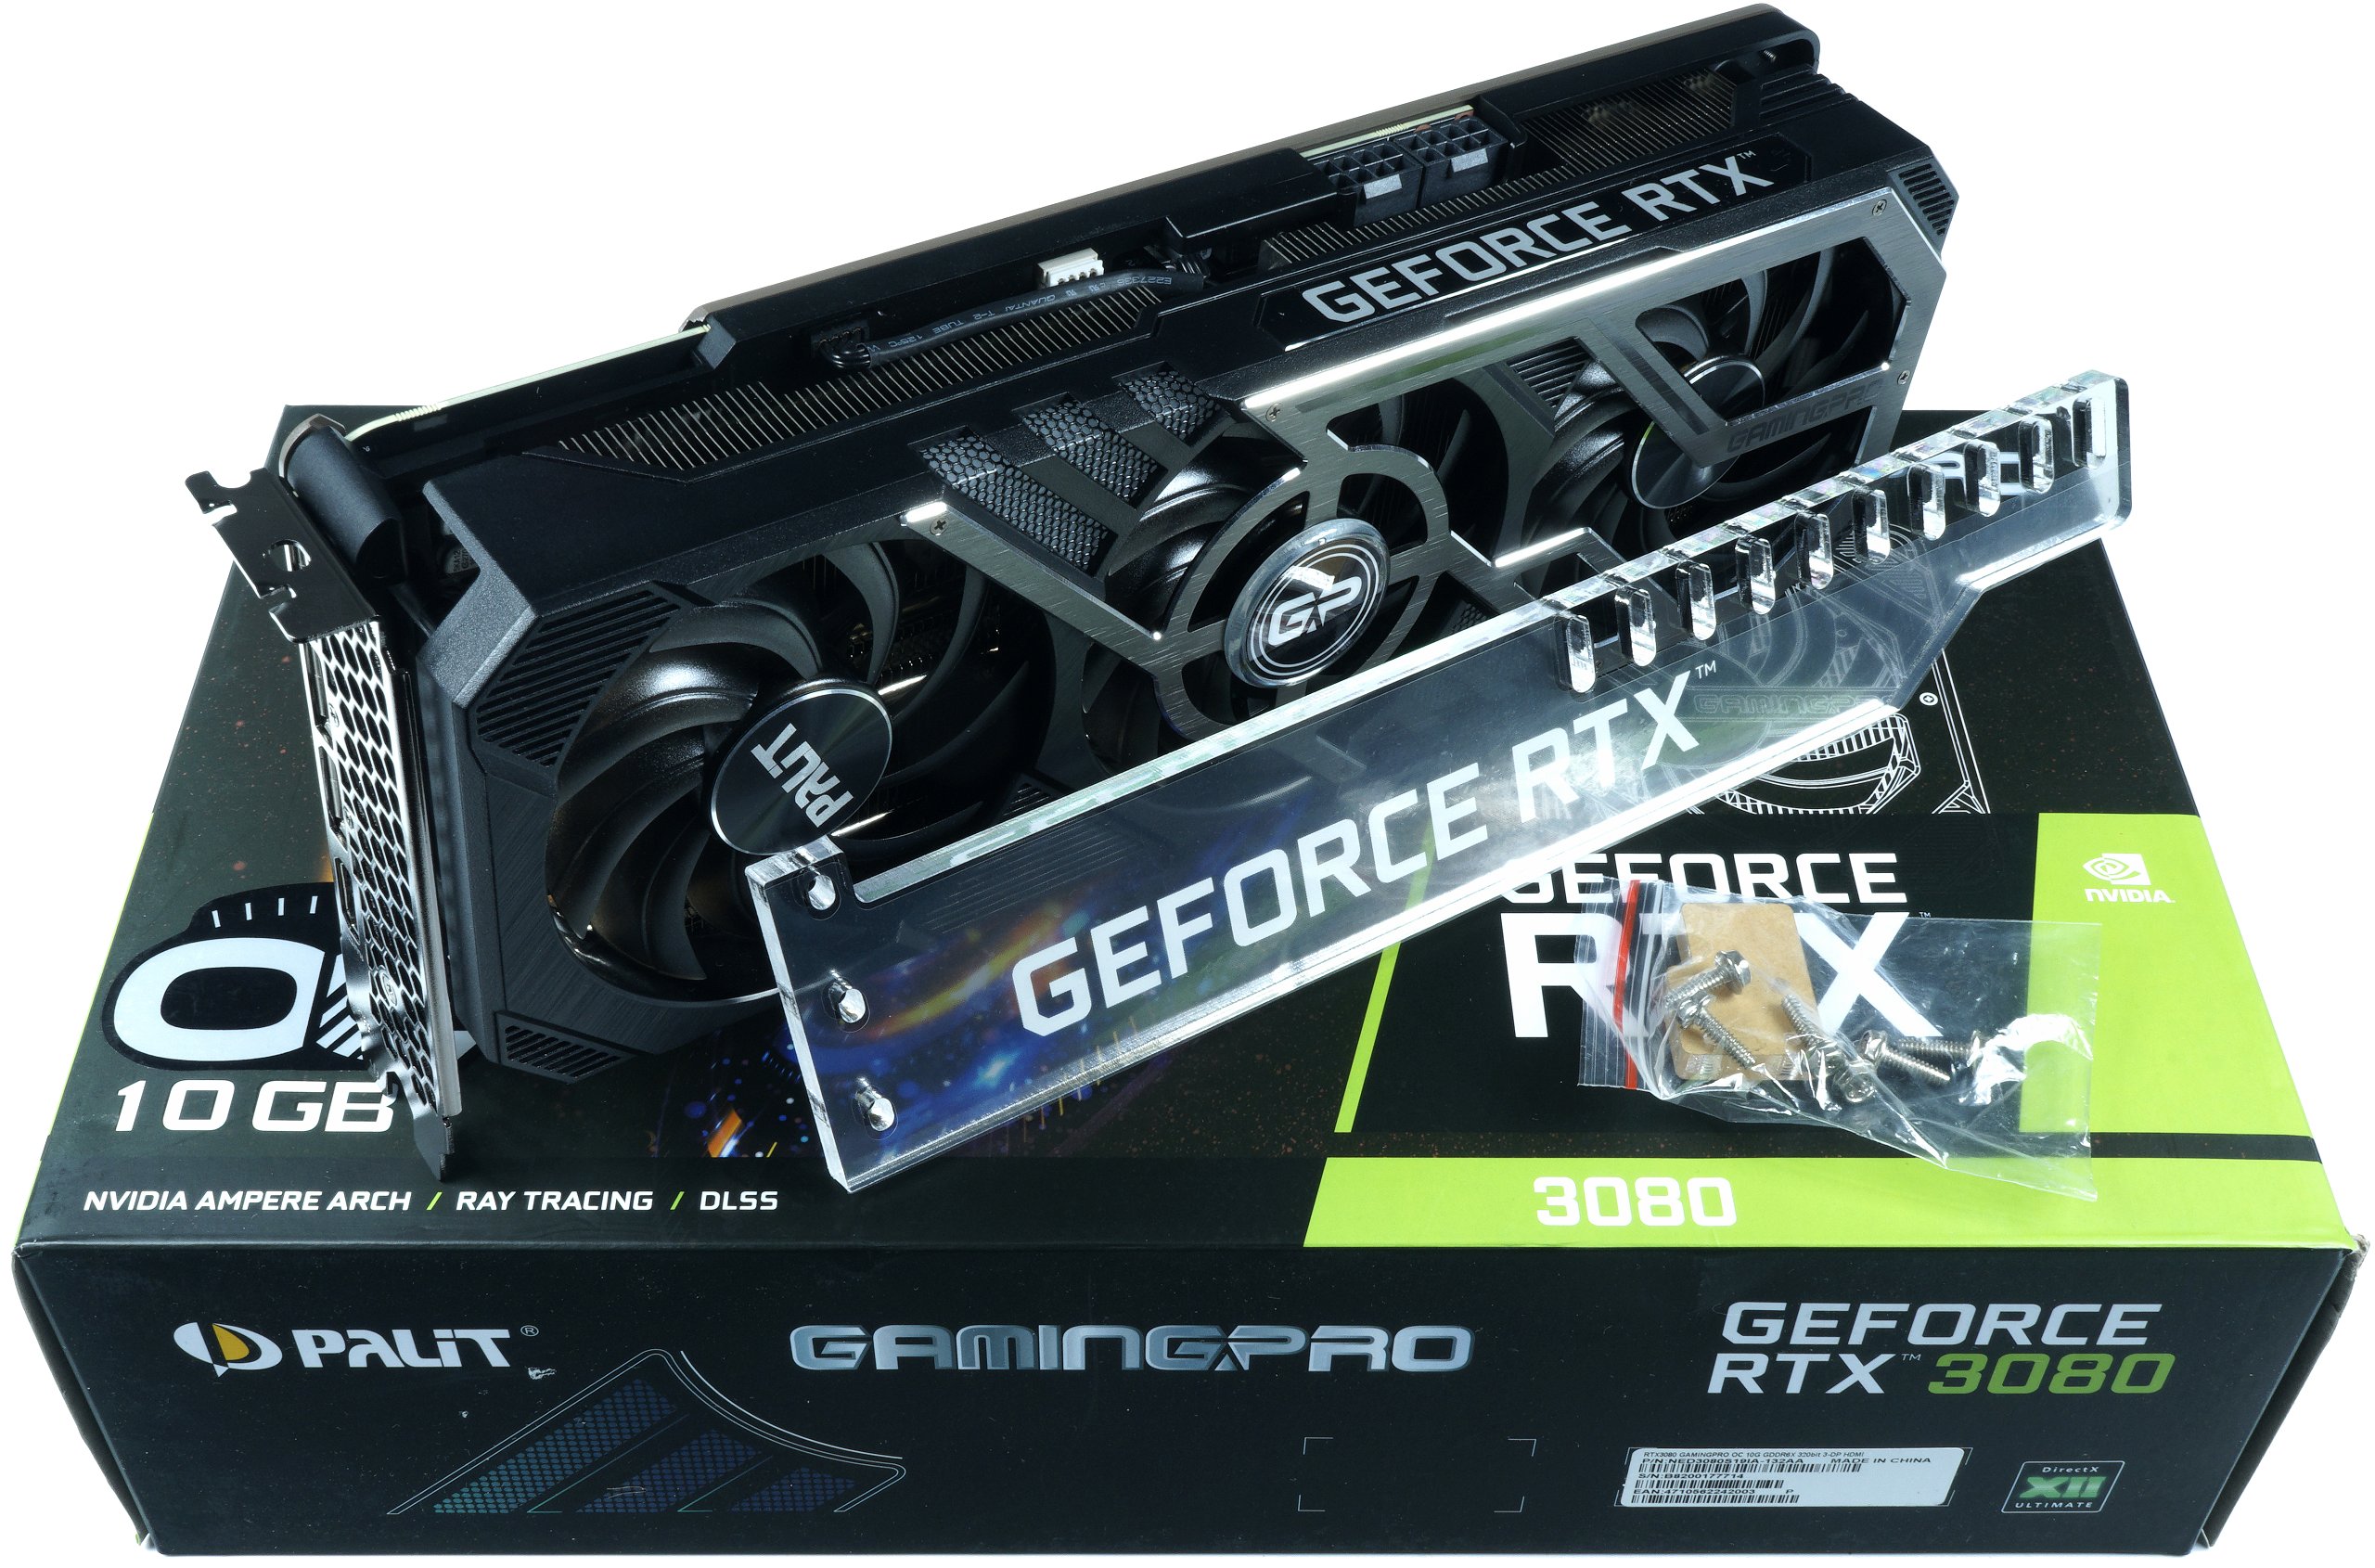 Palit GeForce RTX 3080 Gaming Pro Review - Reasonable Entry into ...